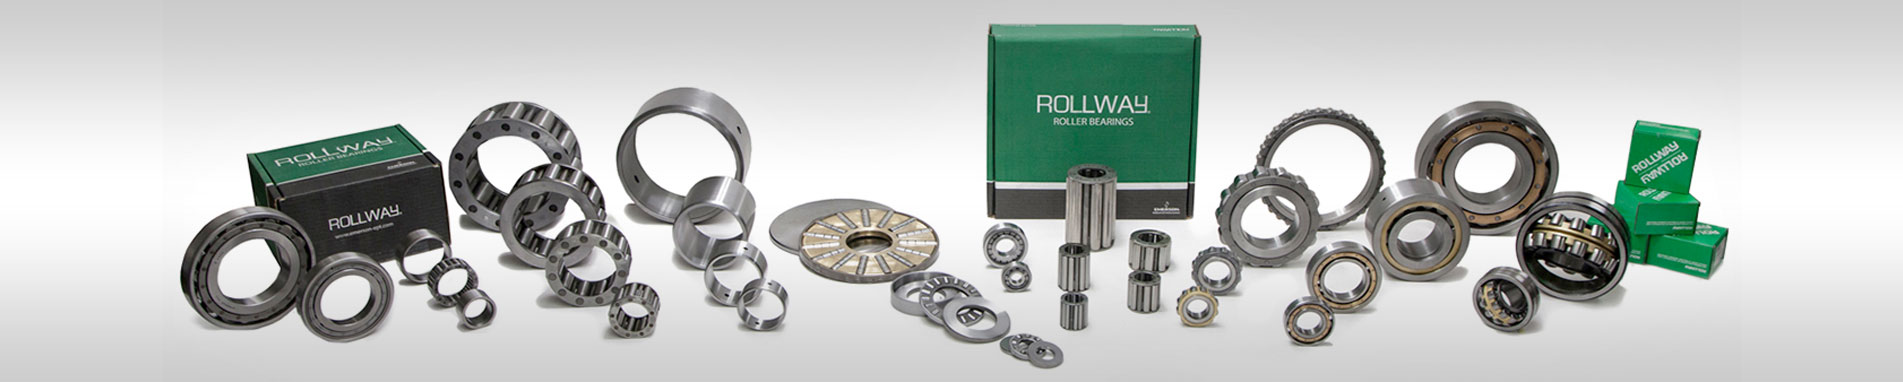 rollway products image